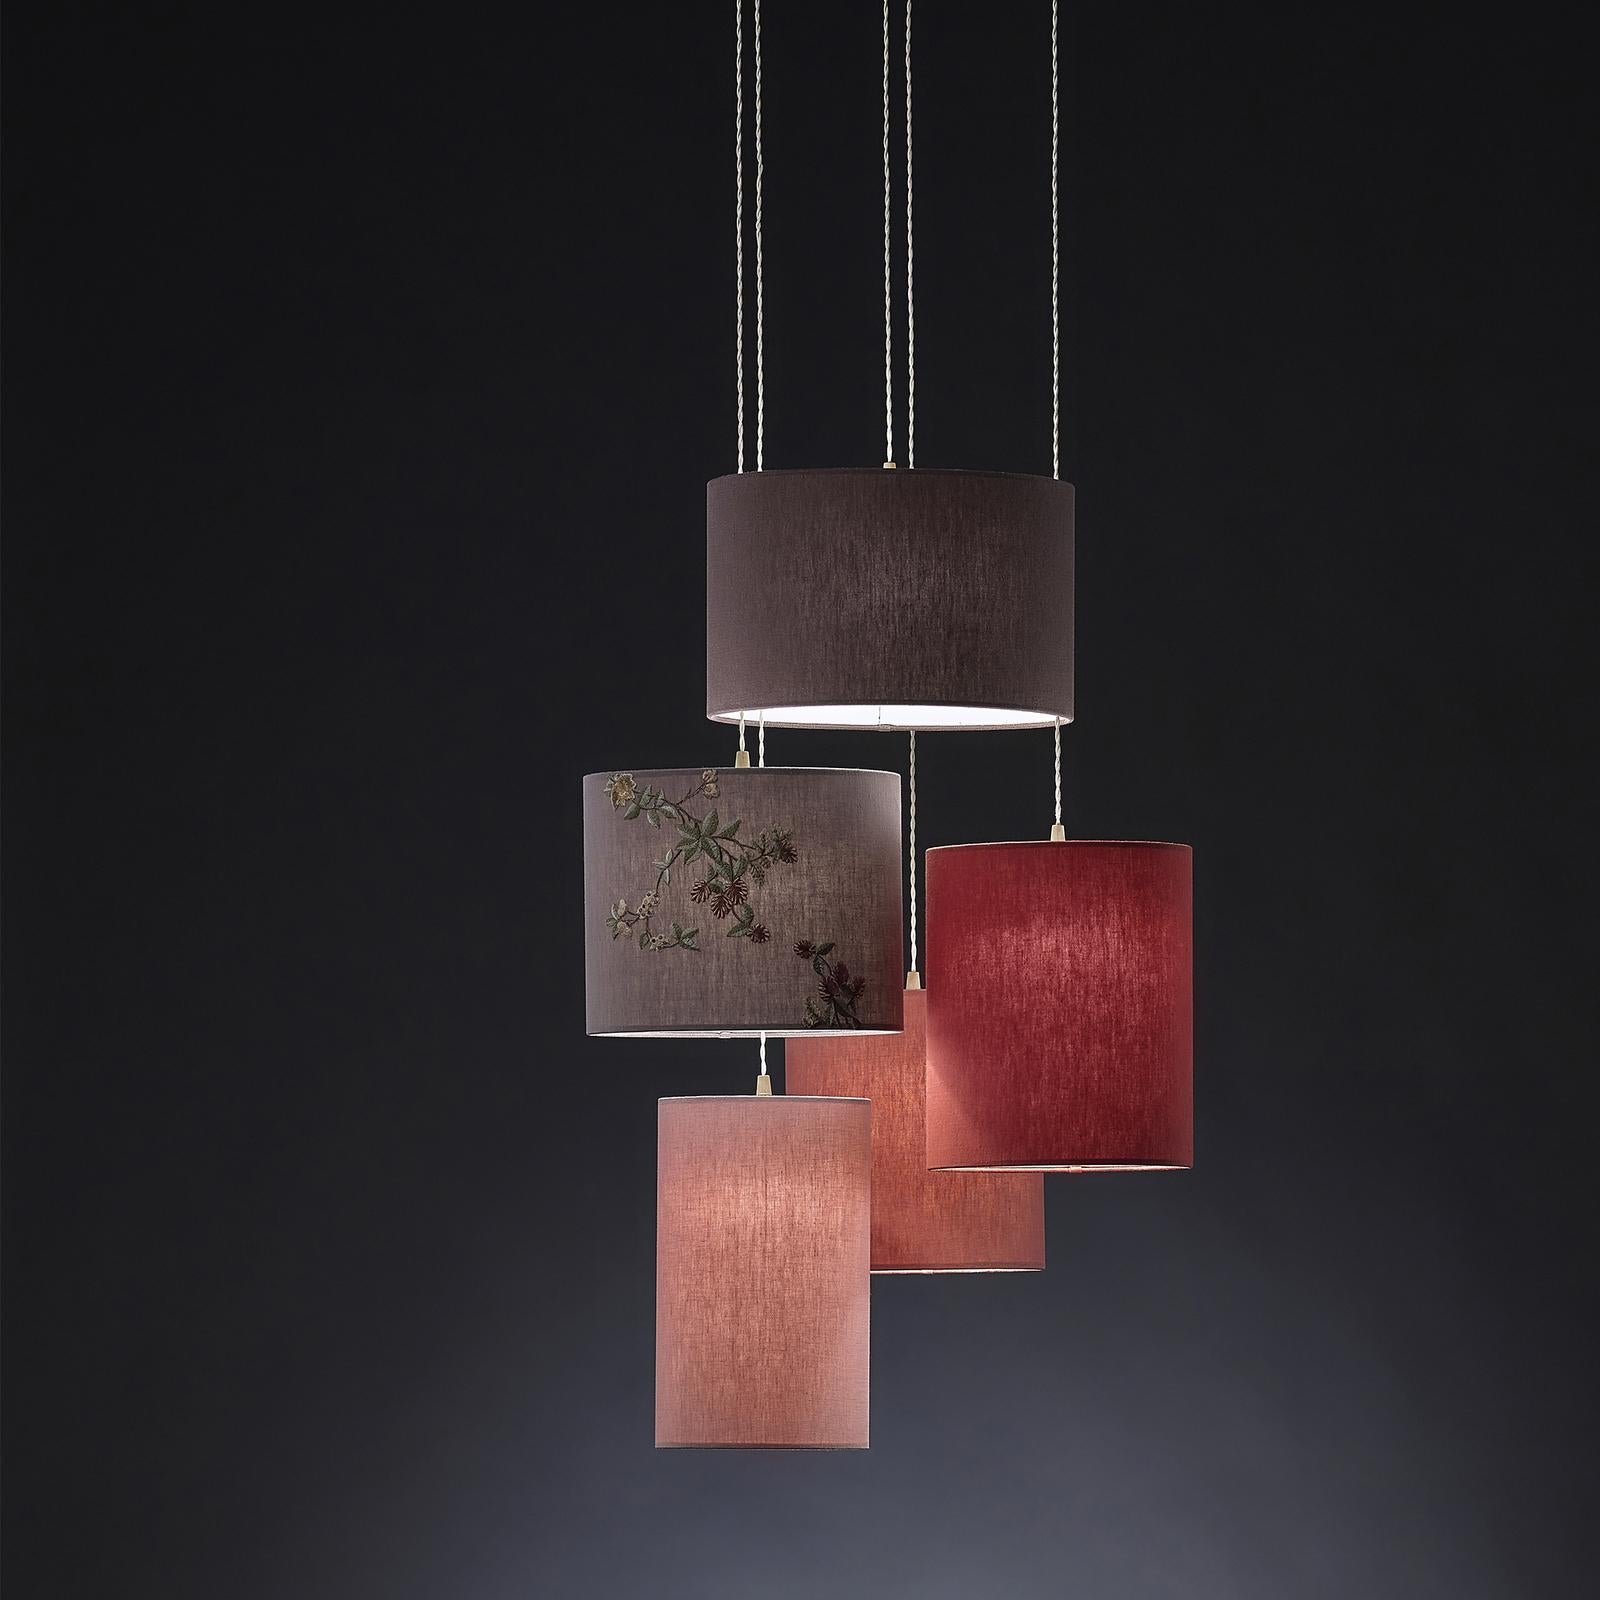 A captivating sea of red and pinks, this stunning set of pendant lamps is a harmonious display of color and shadows. Part of the Insiemi collection, the stone-wash linen drum lampshades create an elegant dance of red hues, ranging from coral pink to